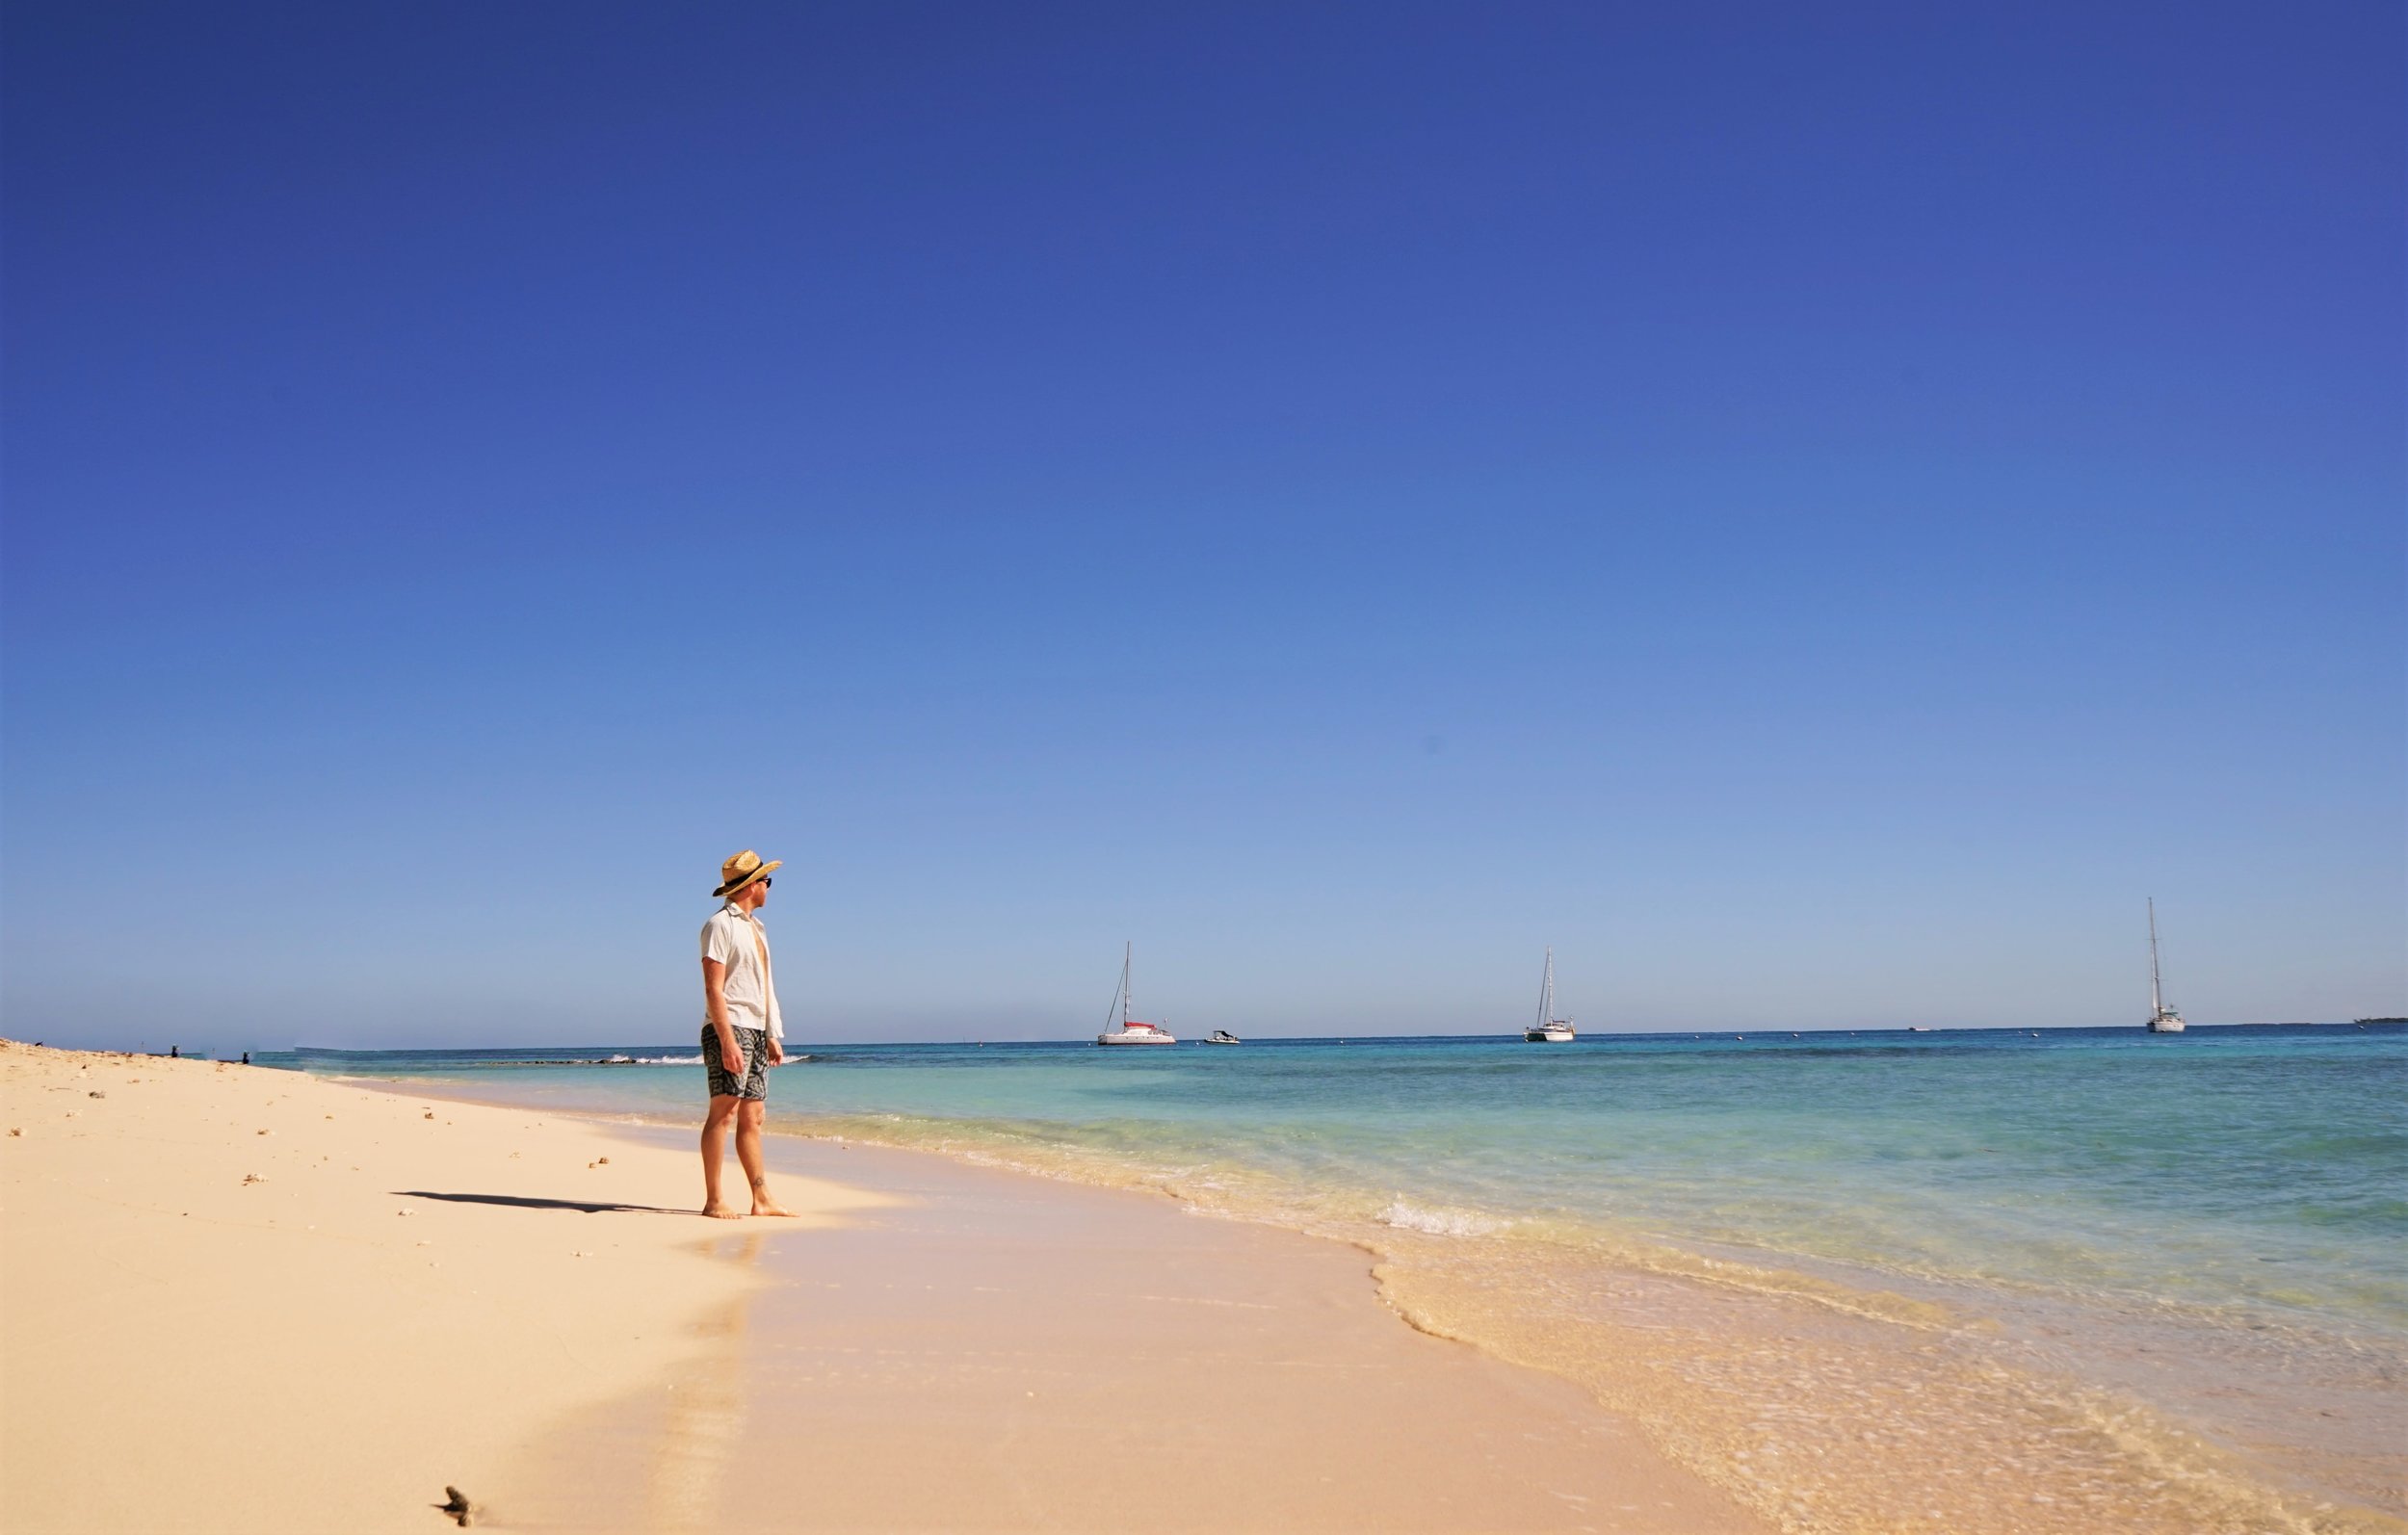 Relaxing on the beautiful sand beaches is one of the best things to do in New Caledonia.